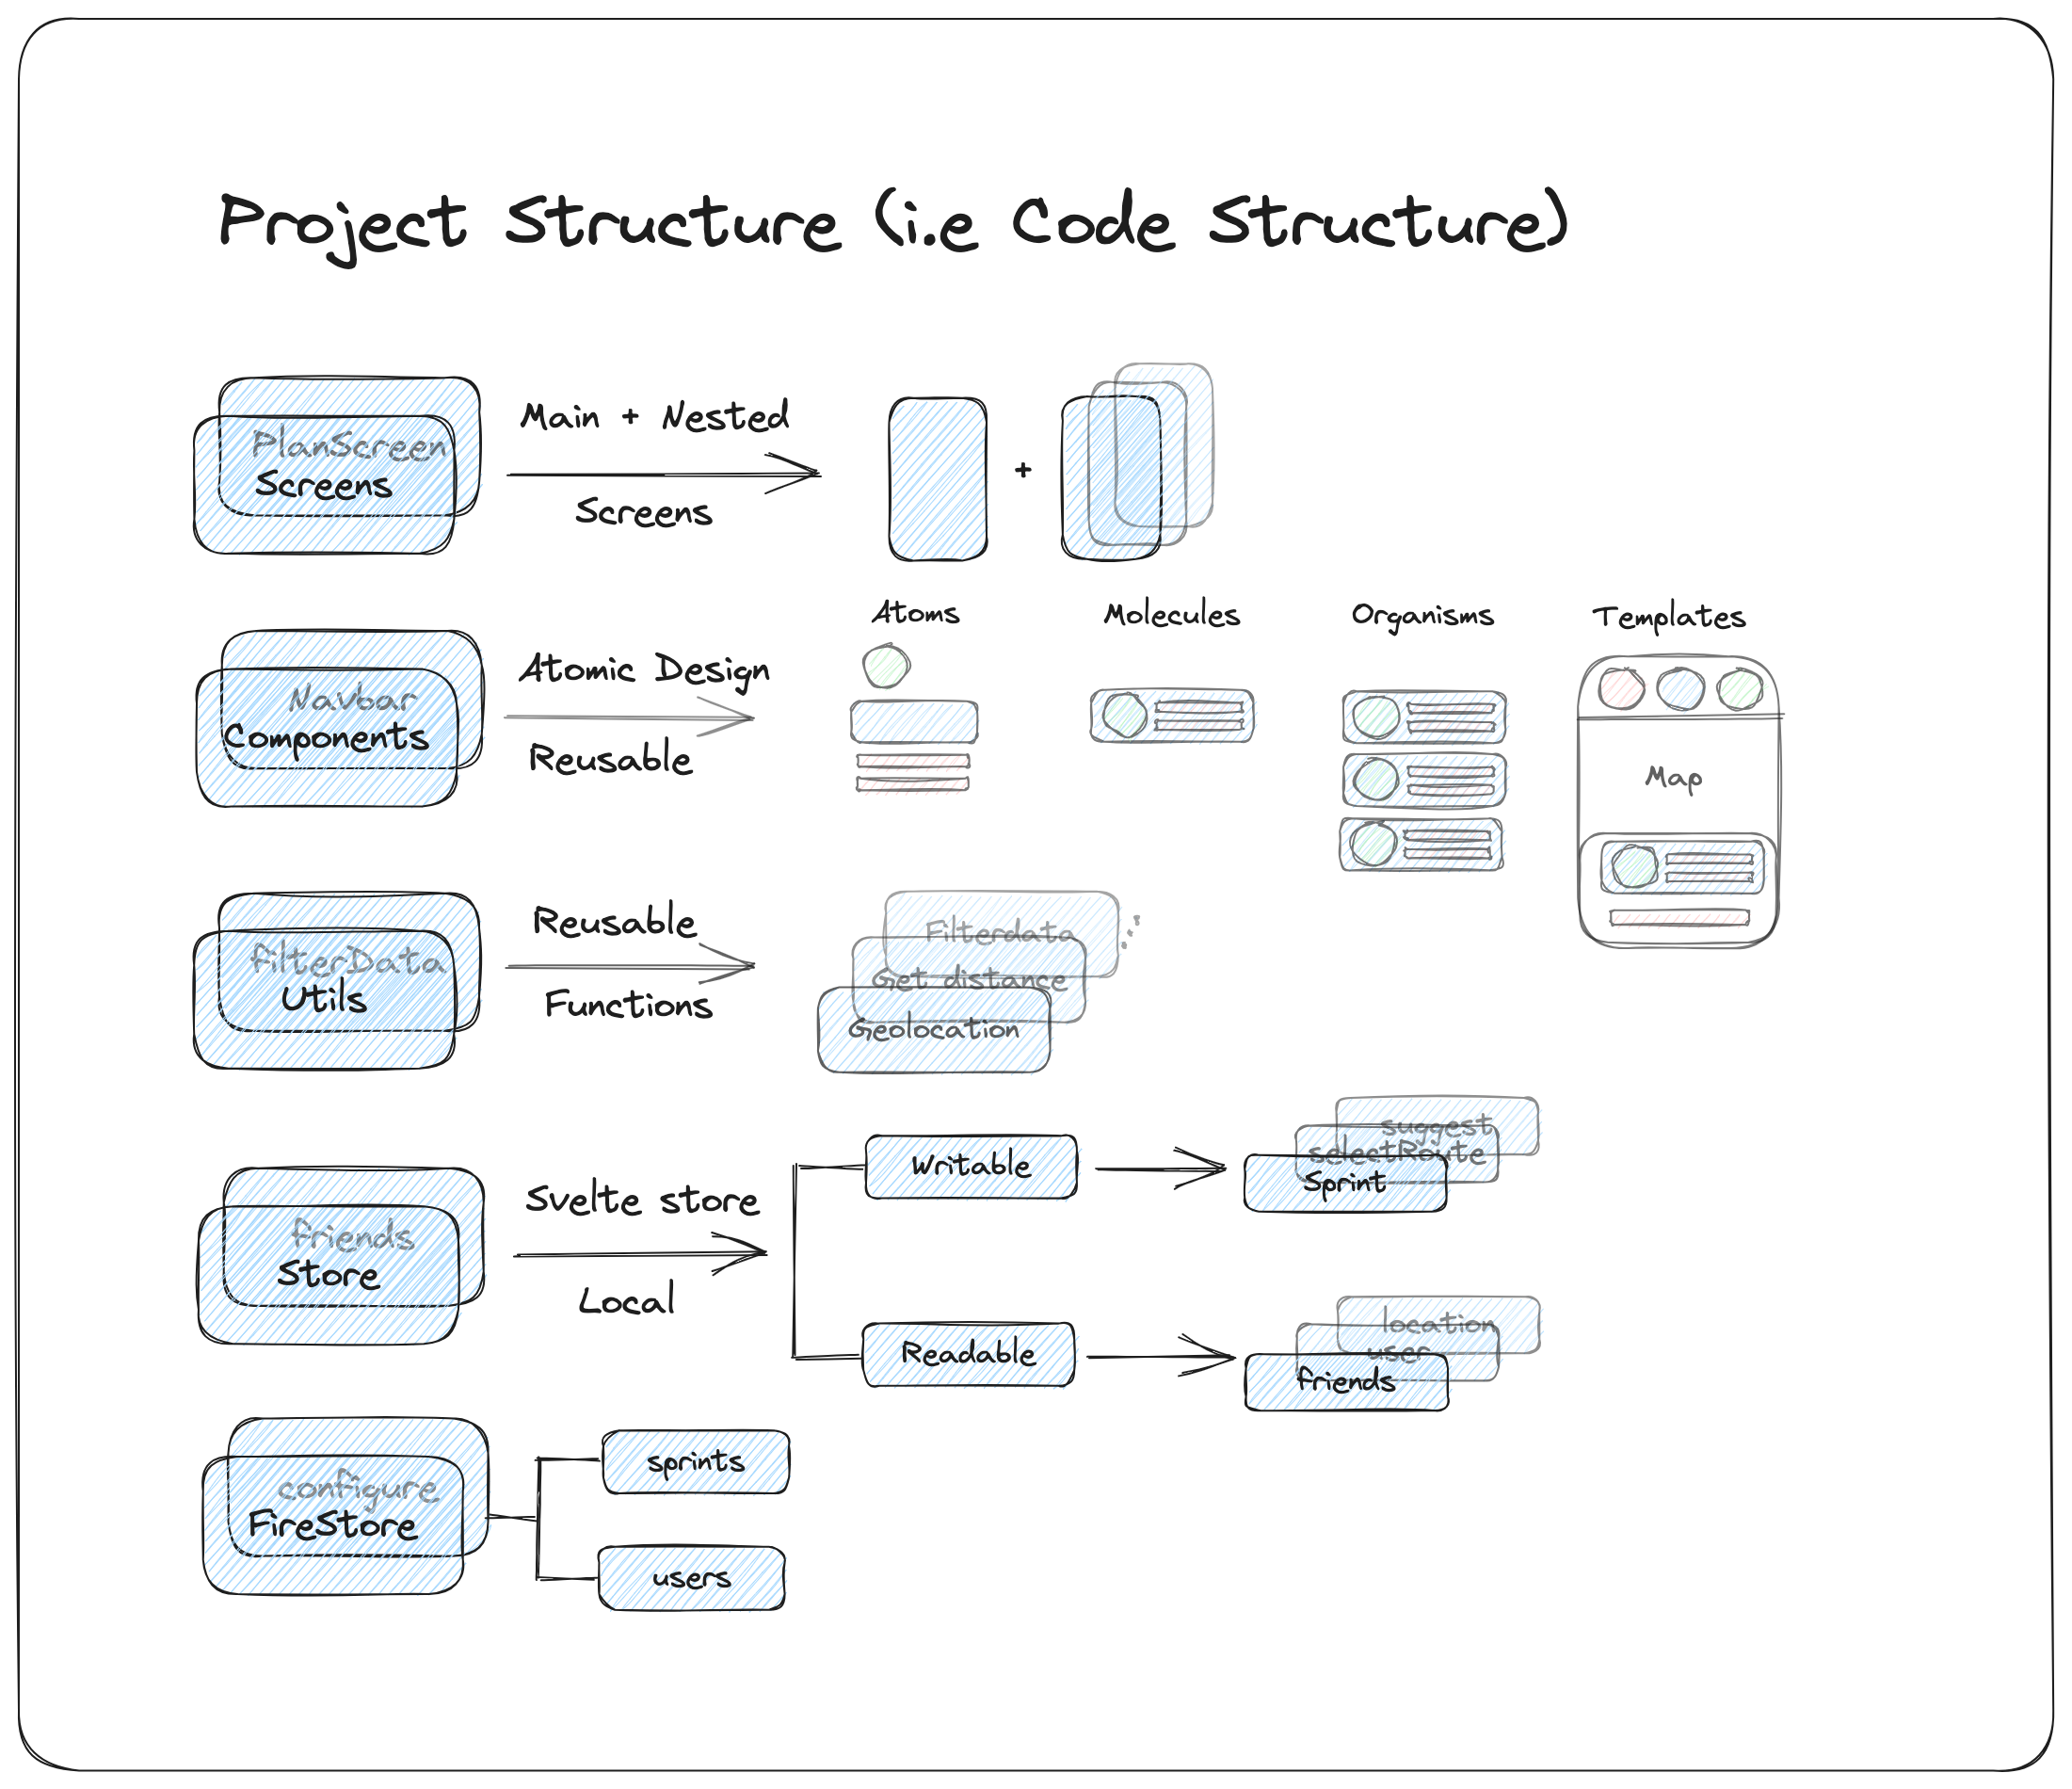 code structure